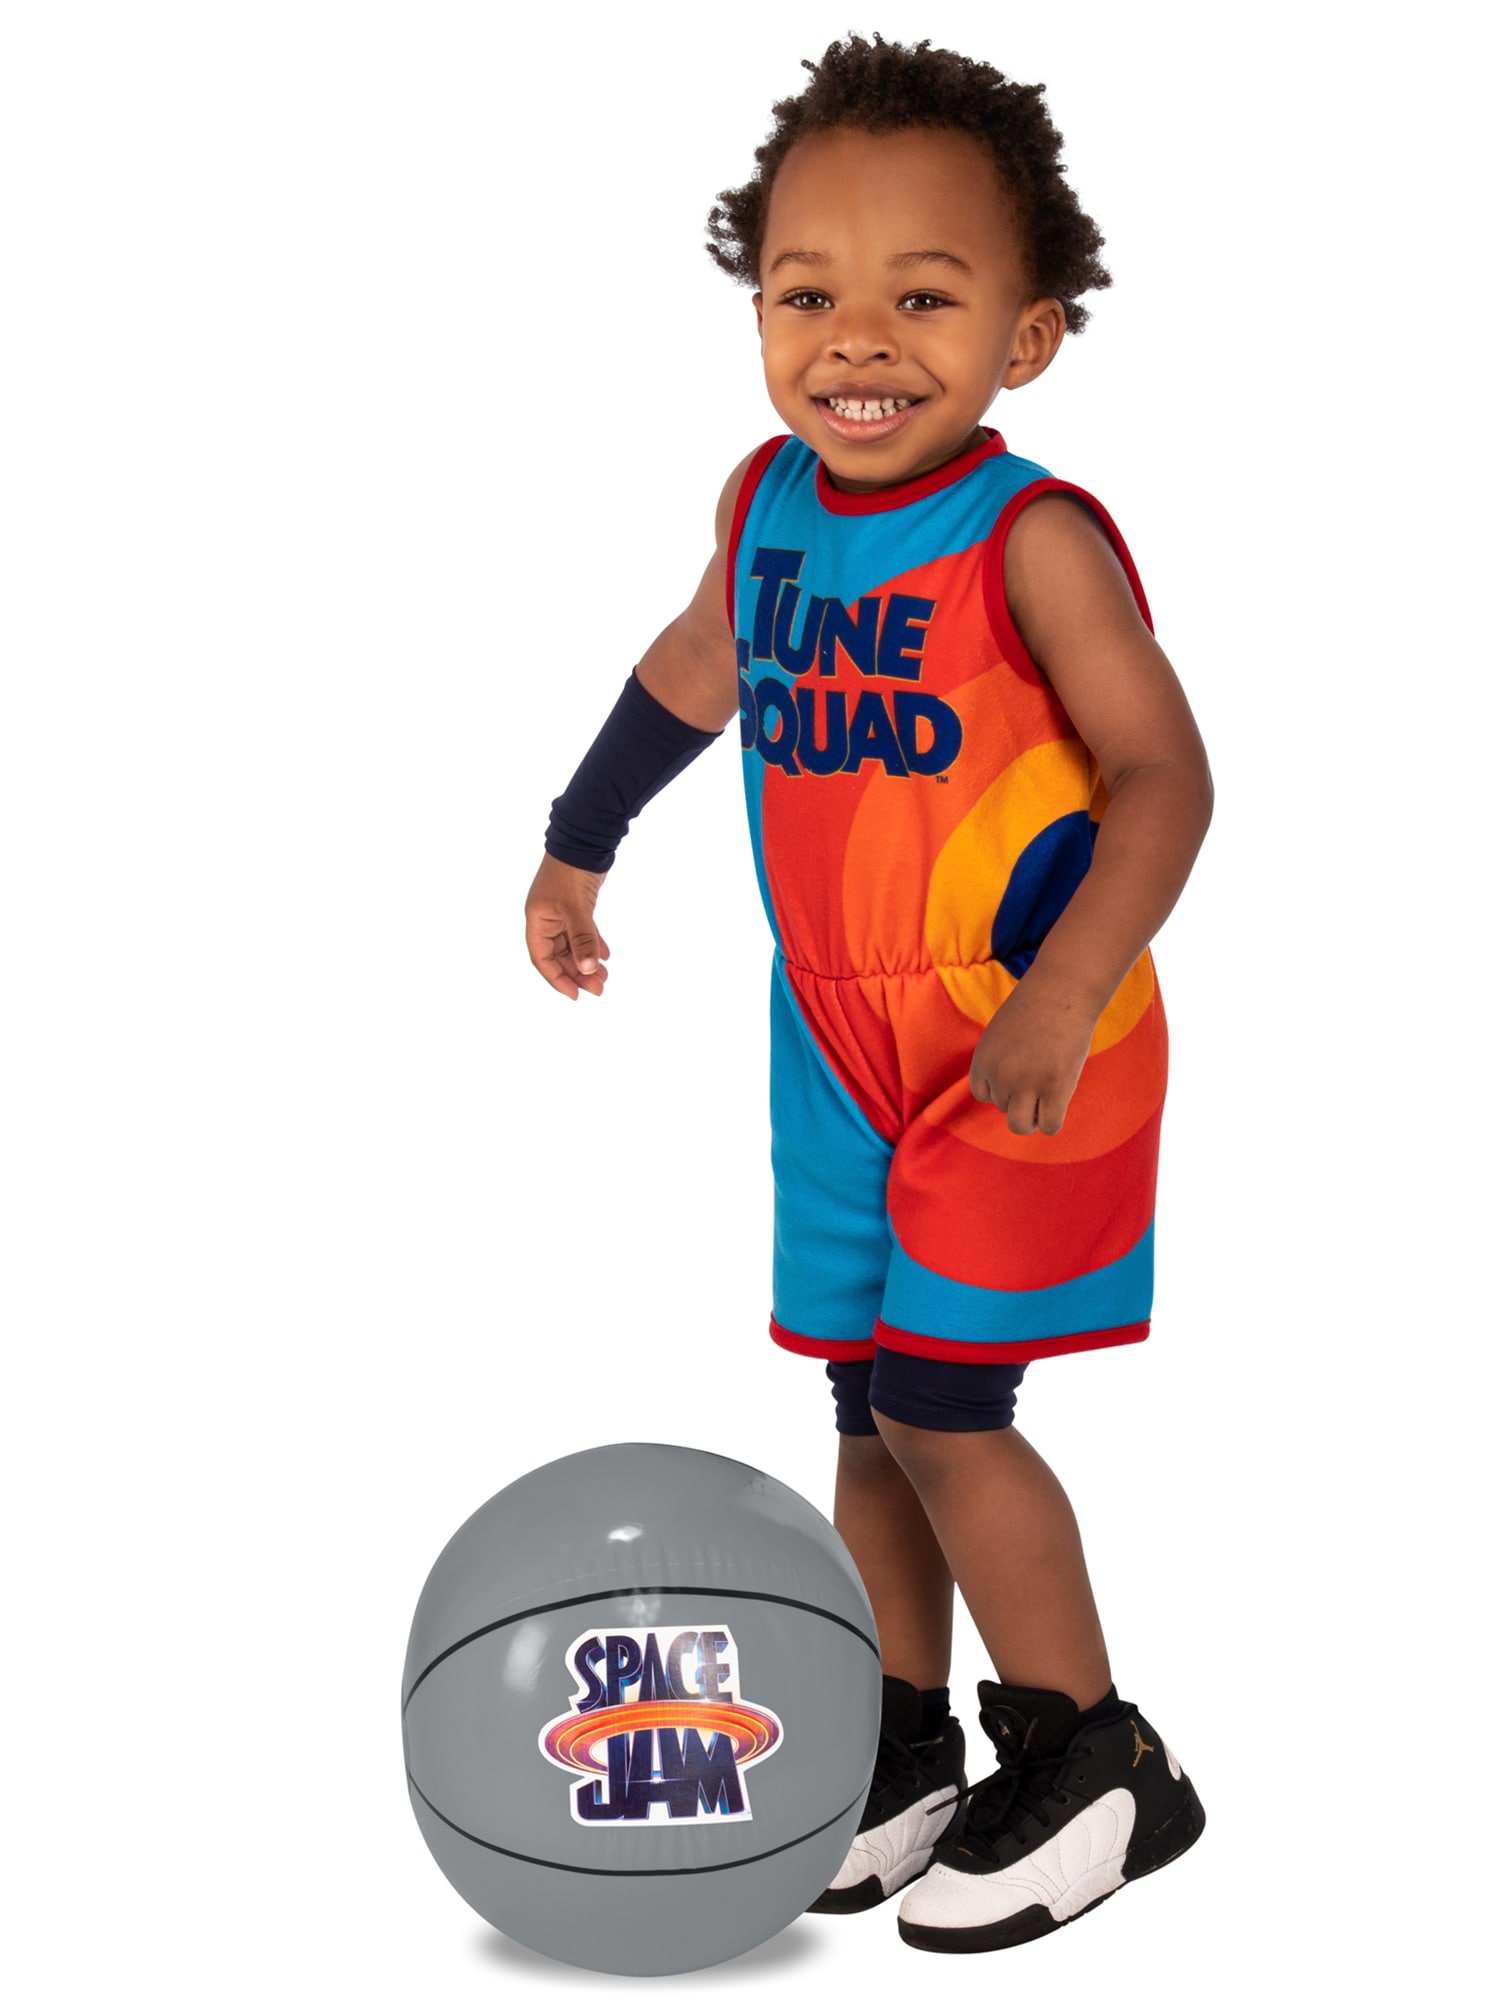 Youth Size Space Jam Basketball Jersey - Get Your Kids Ready for